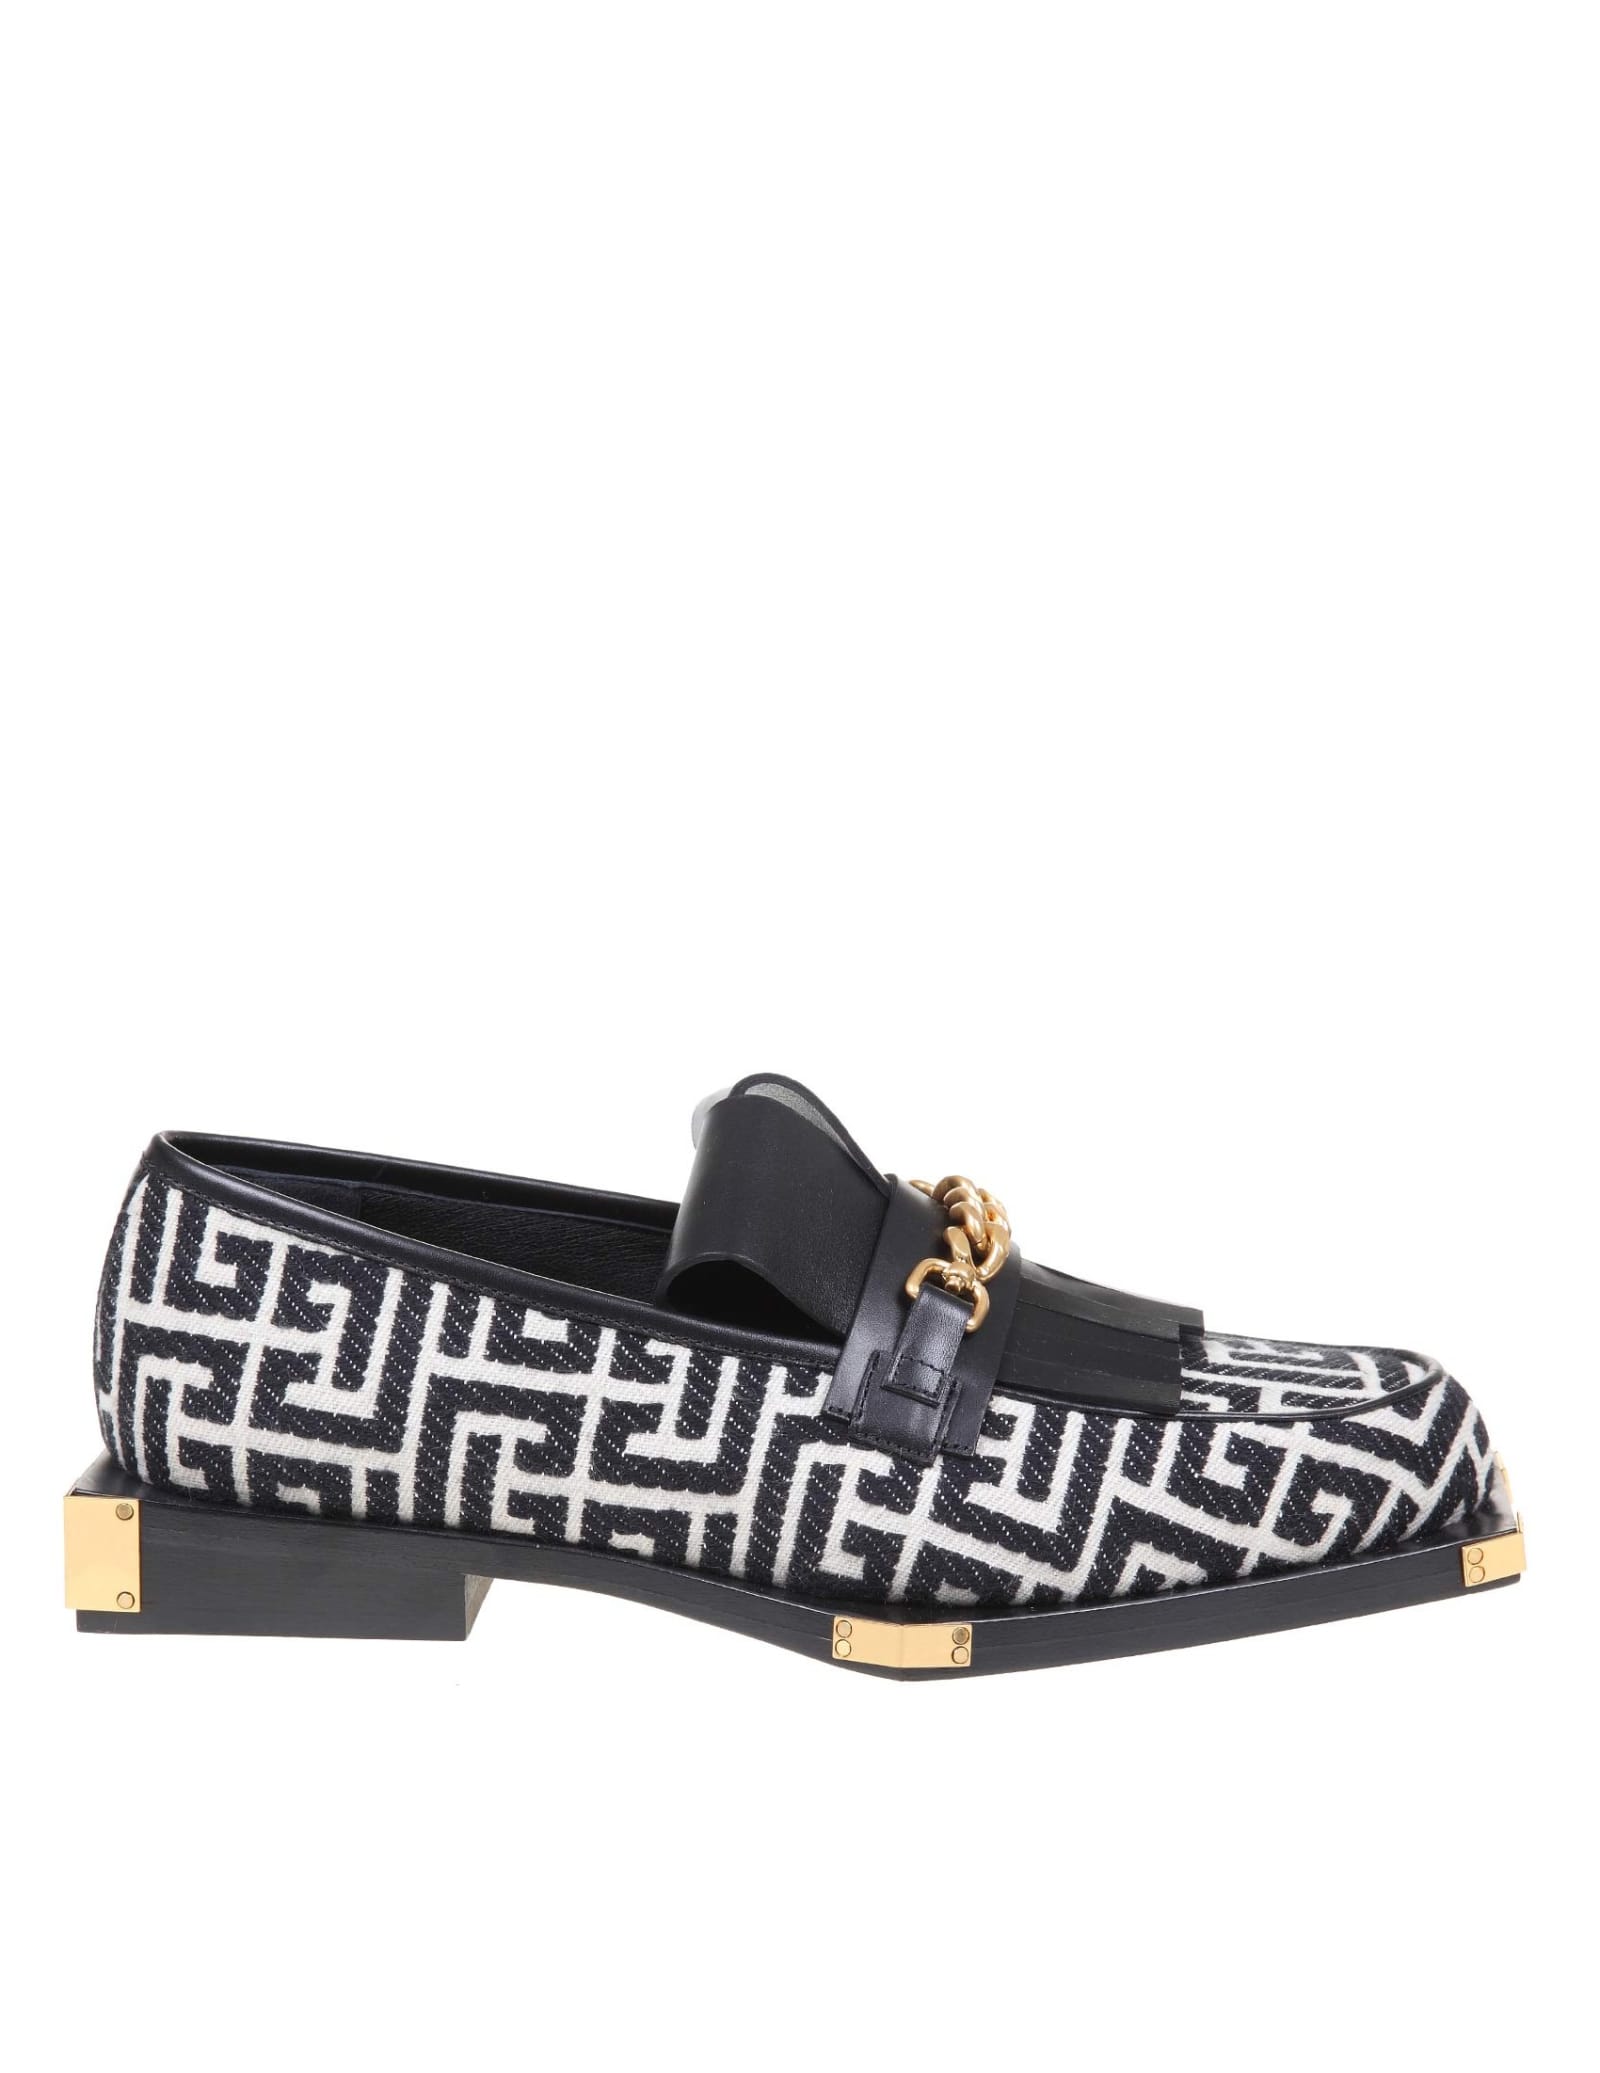 Buy Balmain Gancini Moccasin In Fabric And Leather online, shop Balmain shoes with free shipping